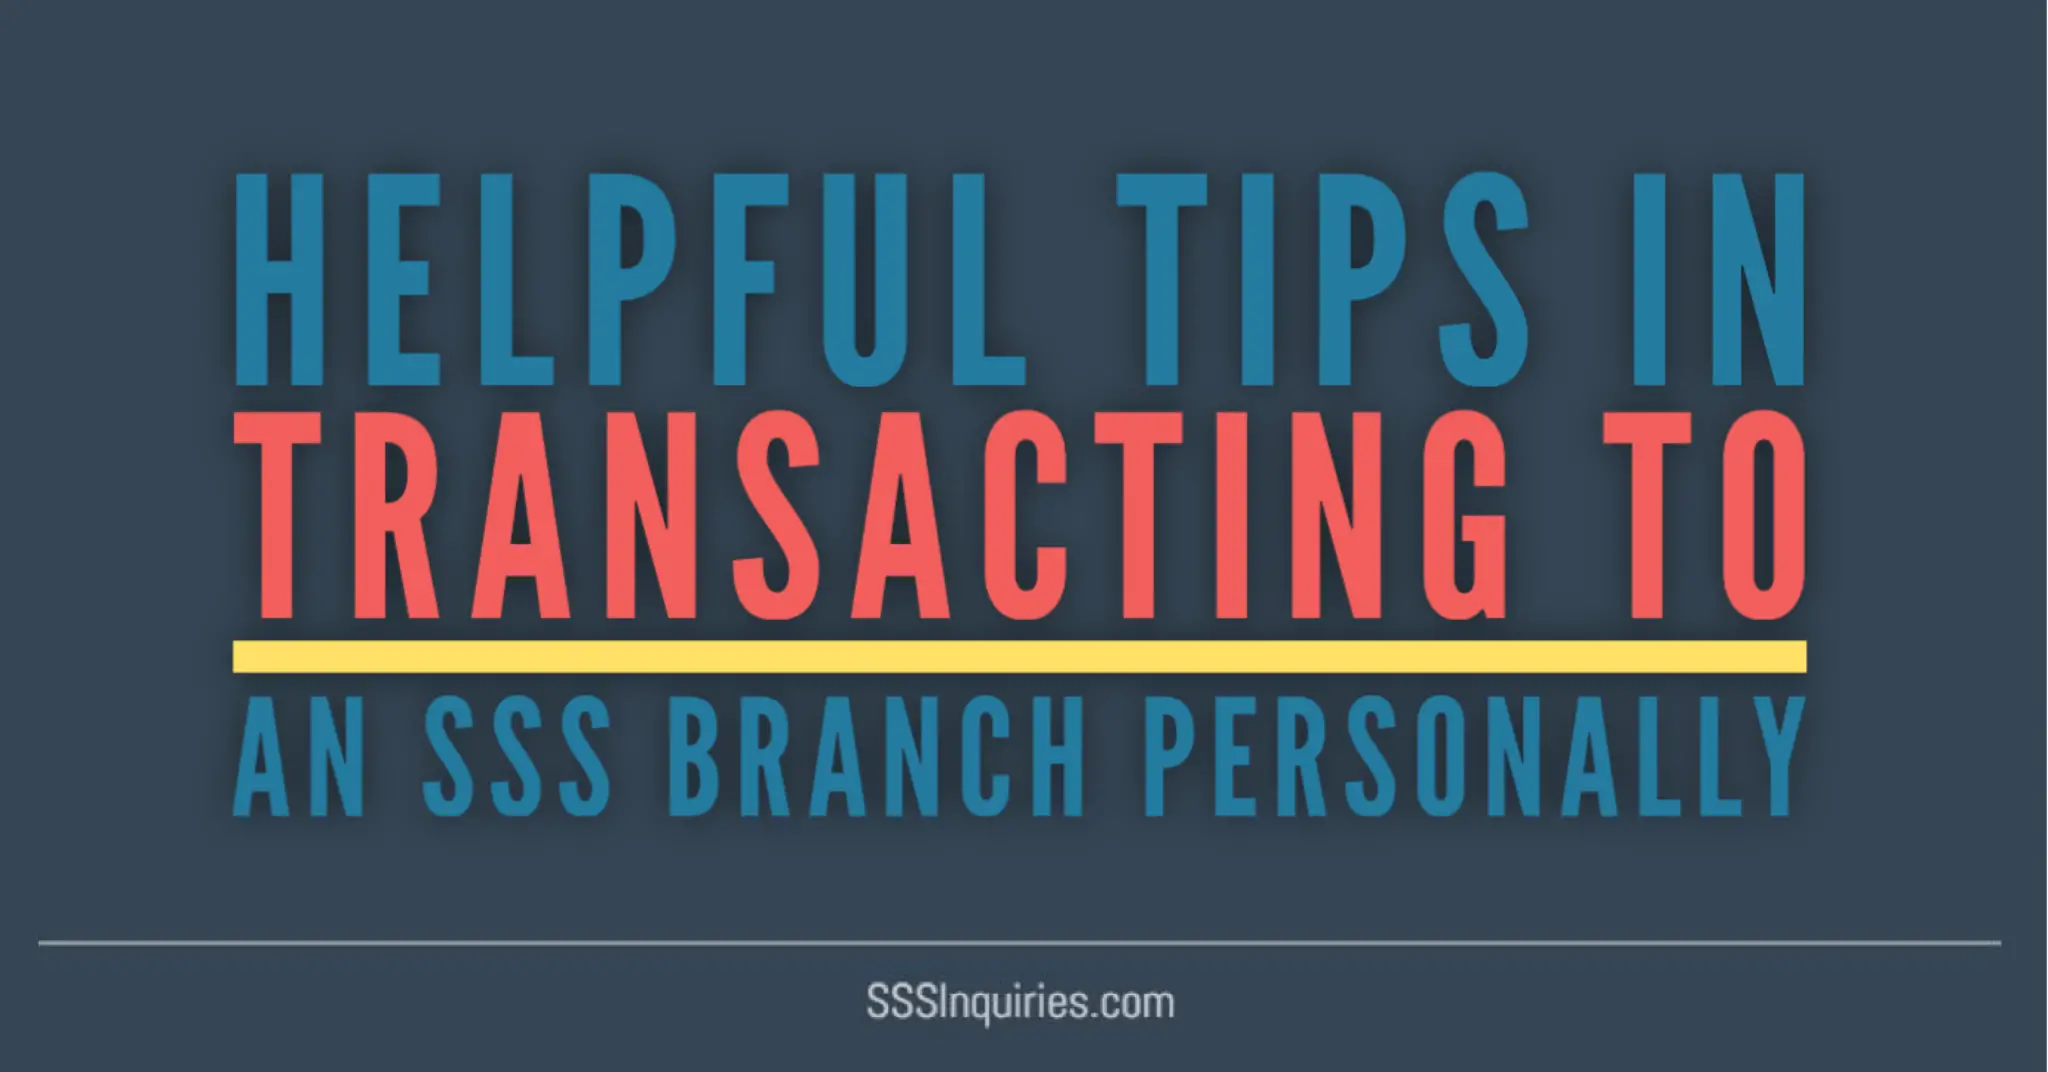 Helpful Tips in Transacting to an SSS Branch personally